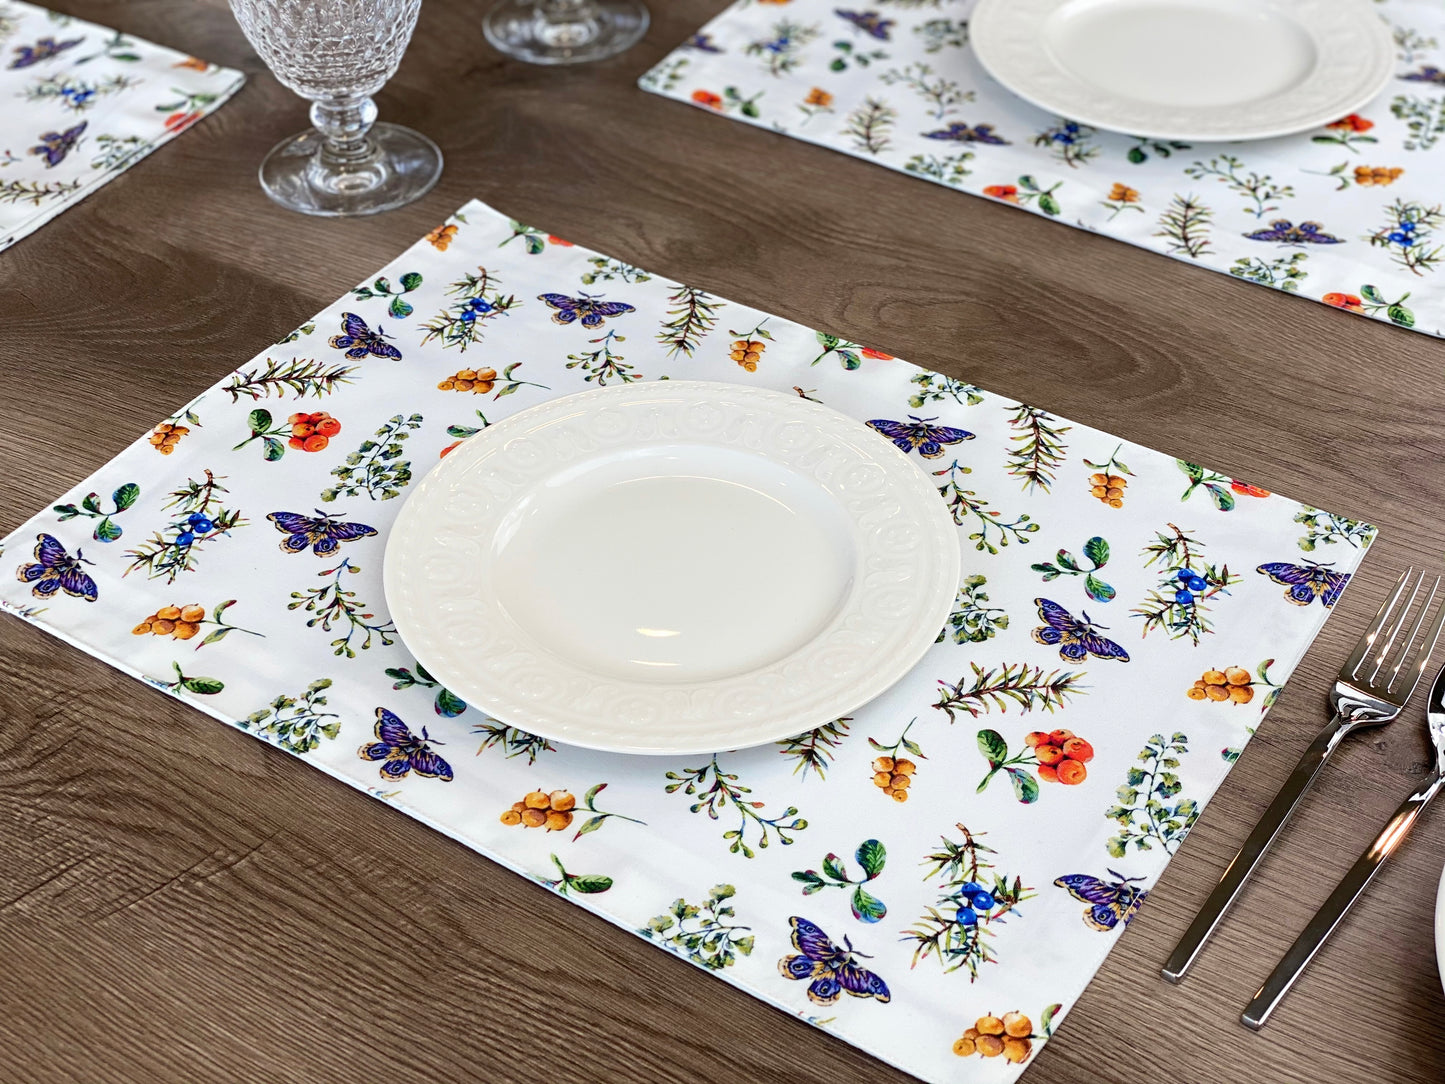 Set of 4 floral forest Placemat, butterflies with fir branches, berries and fern pattern, Washable Cotton Placemat for fall dining table